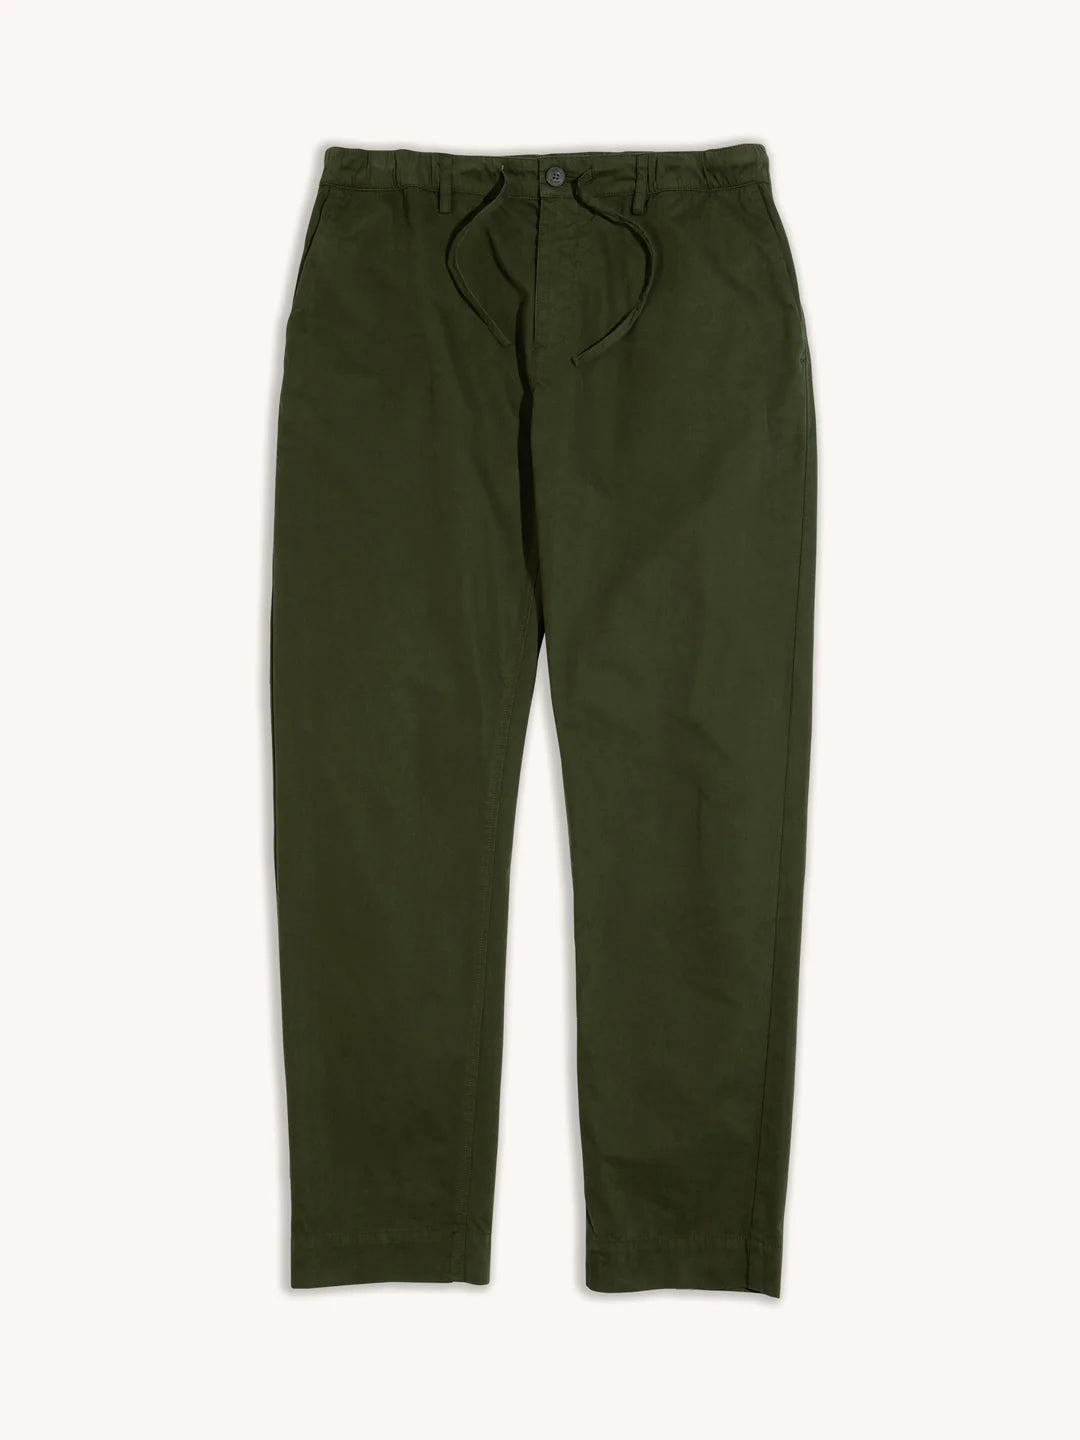 INVERNESS TAPERED COTTON TWILL PANTS - DEFENDER GREEN